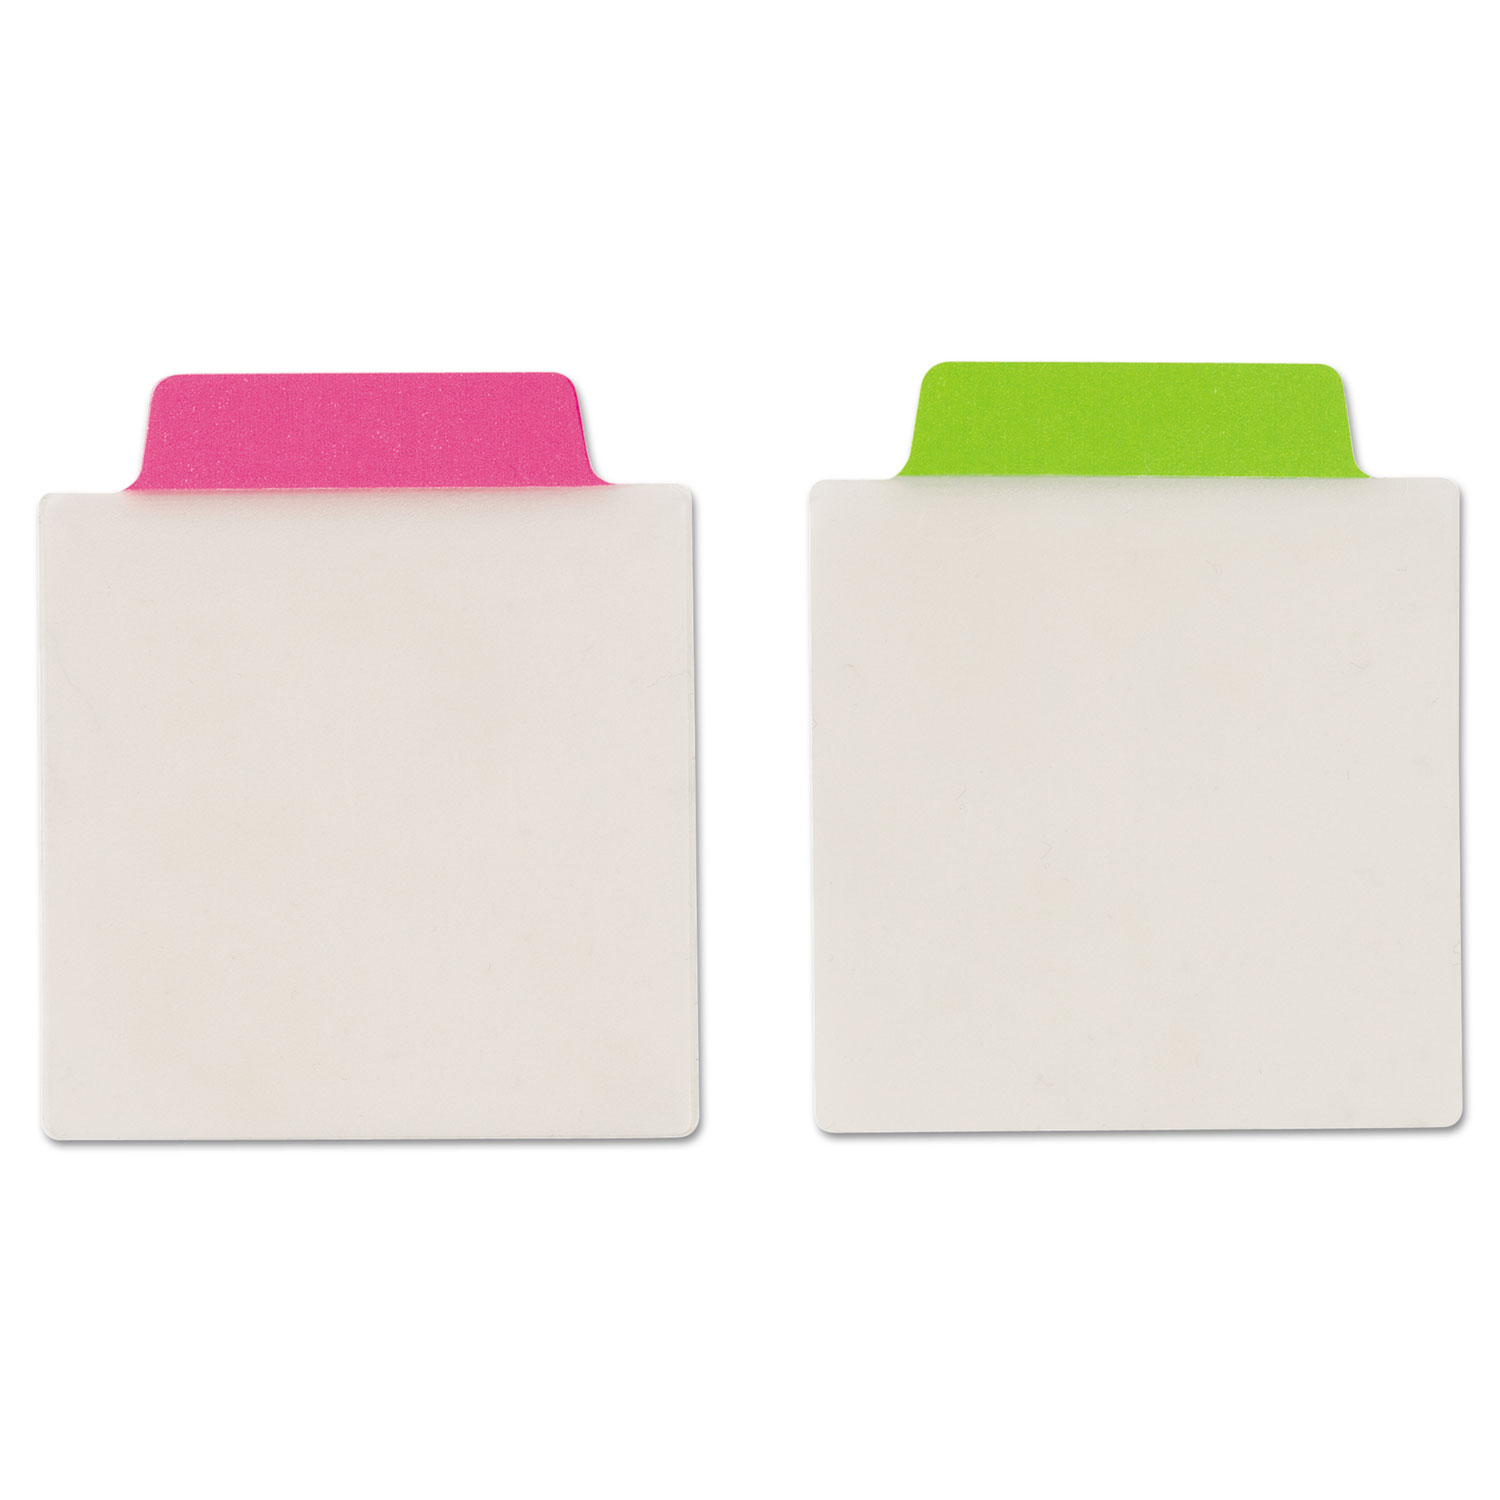 Ultra Tabs Repositionable Tabs, 3 x 3 1/2, Neon: Green, Pink, 12/Pack